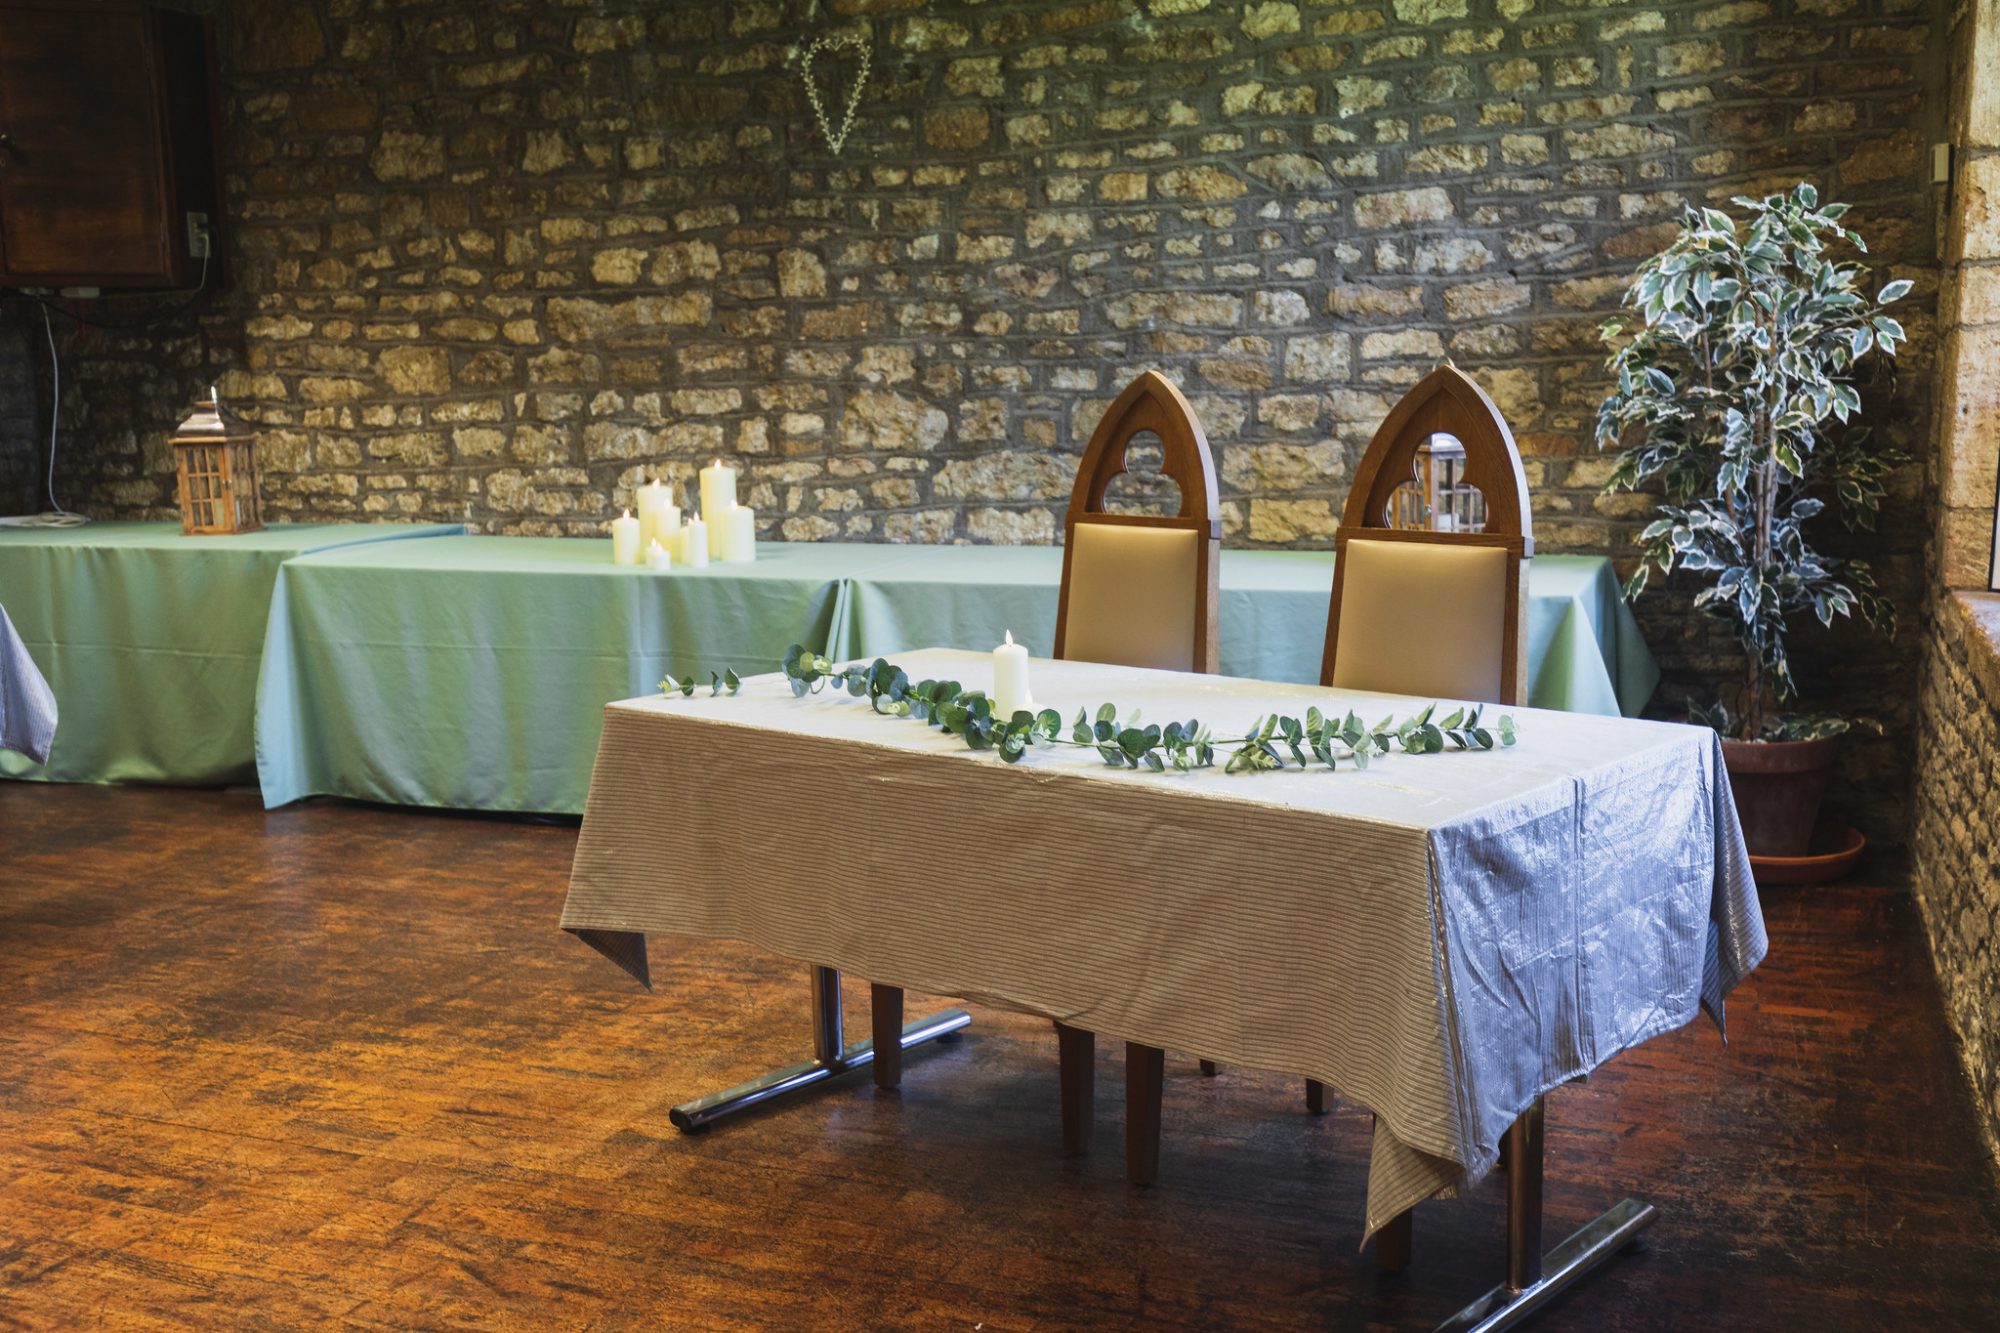 wedding ceremony setting - table with white cloth and leaves and candle, with 2 medieval style chairs behind. Bare stone walls in background